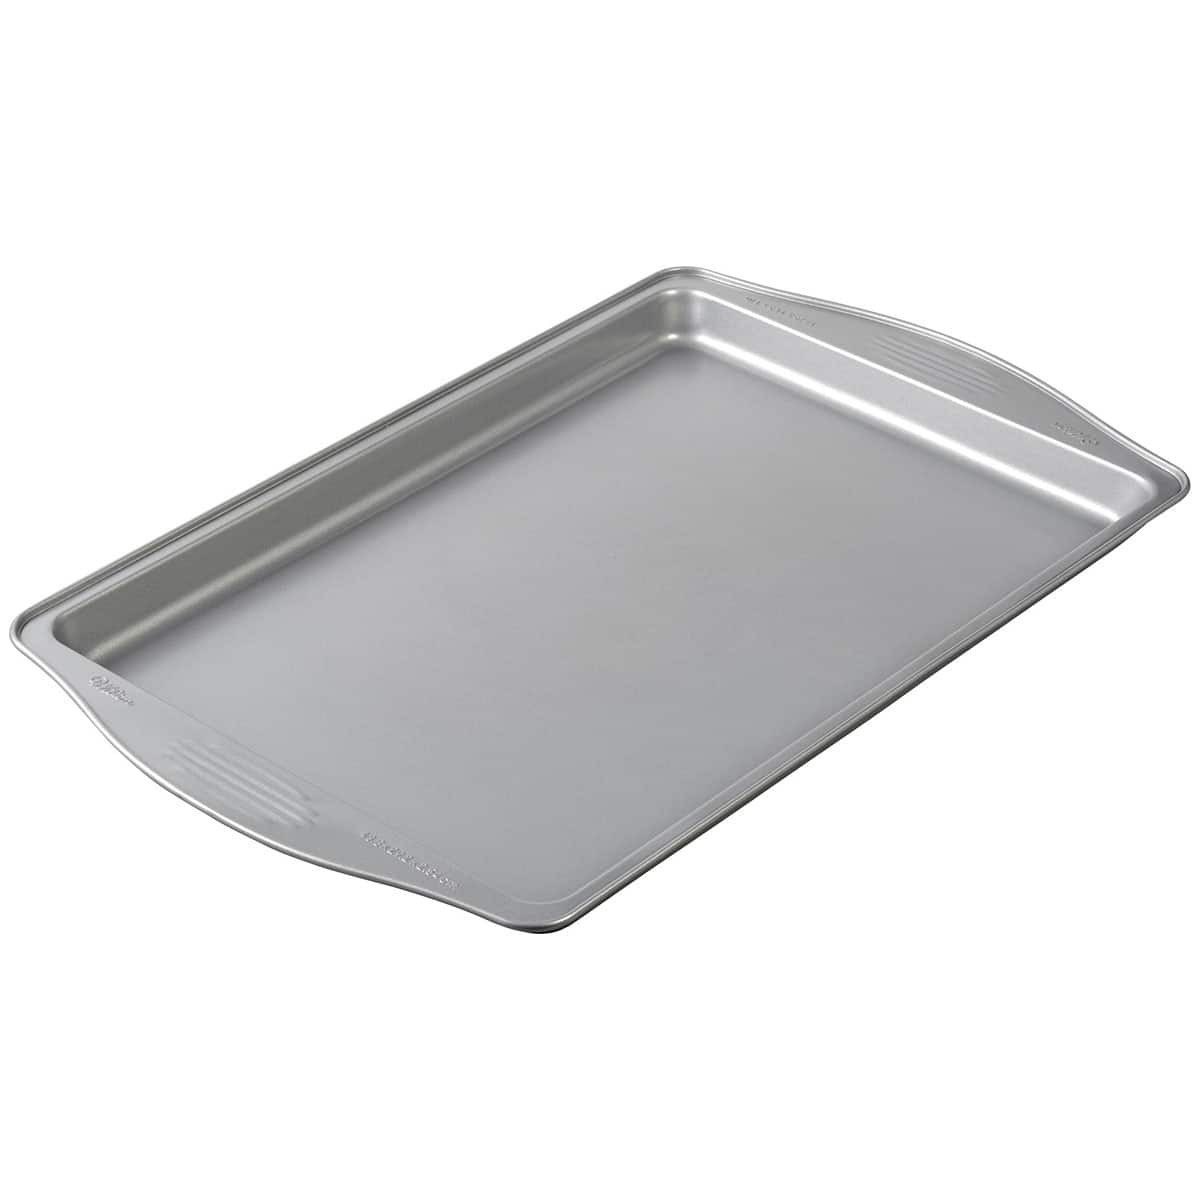 Whats The Best Cake Pan Size